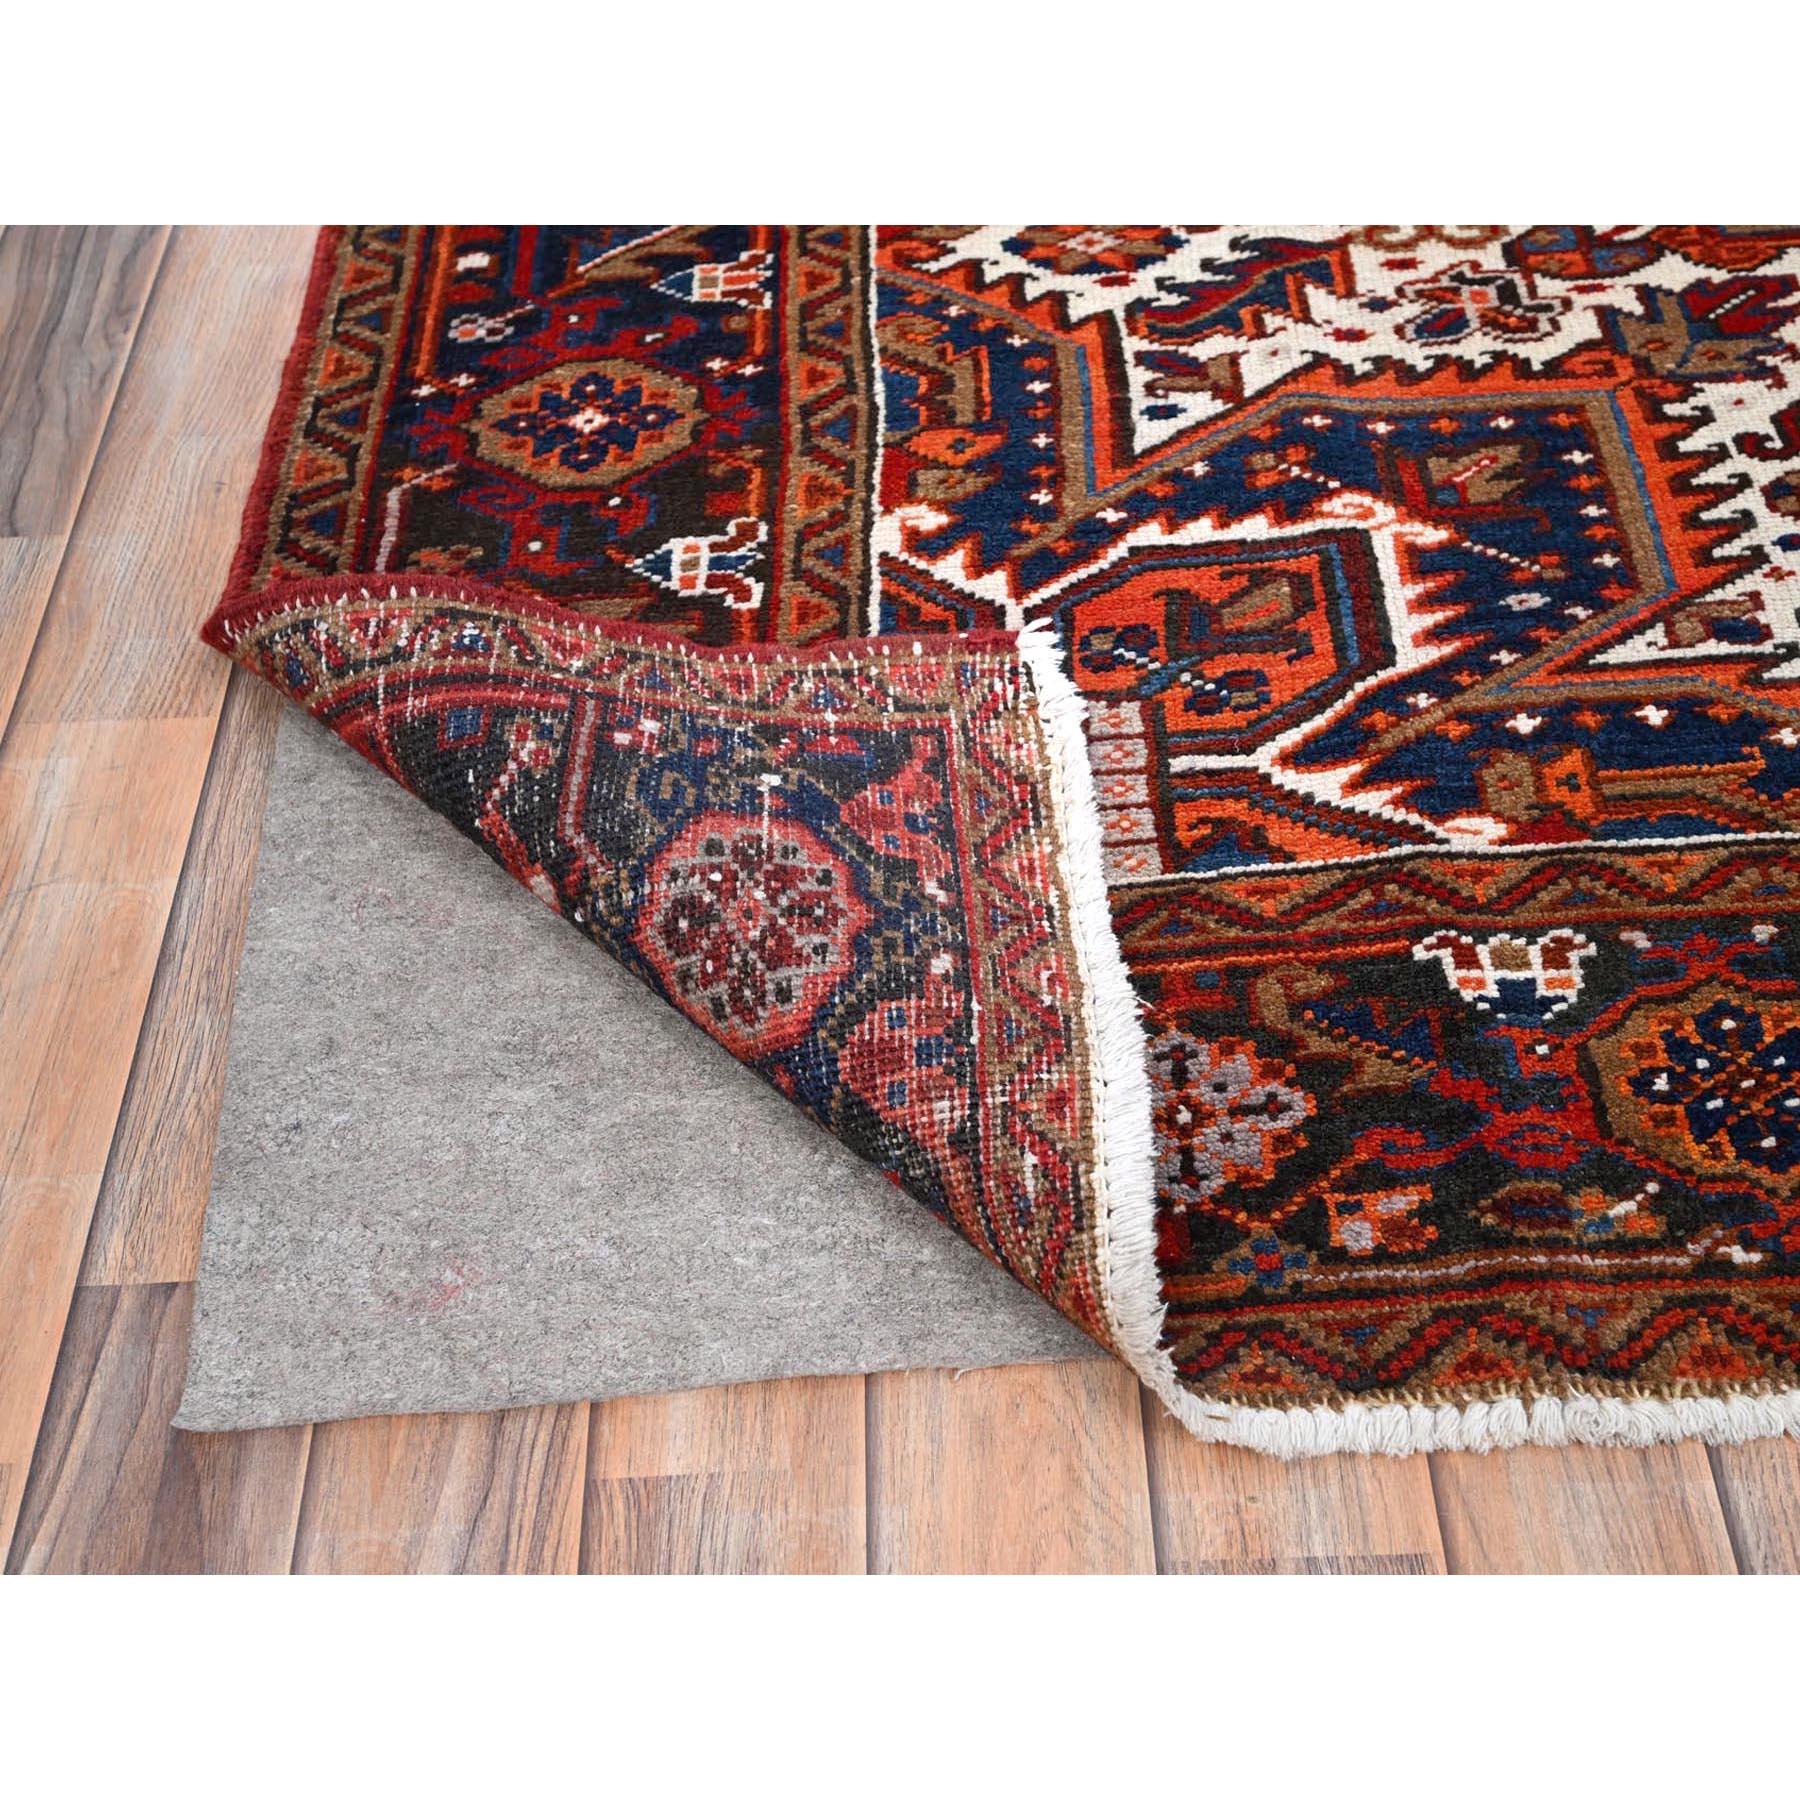 Mid-20th Century Red Rustic Feel Worn Wool Hand Knotted Vintage Persian Heriz Village Motif Rug For Sale